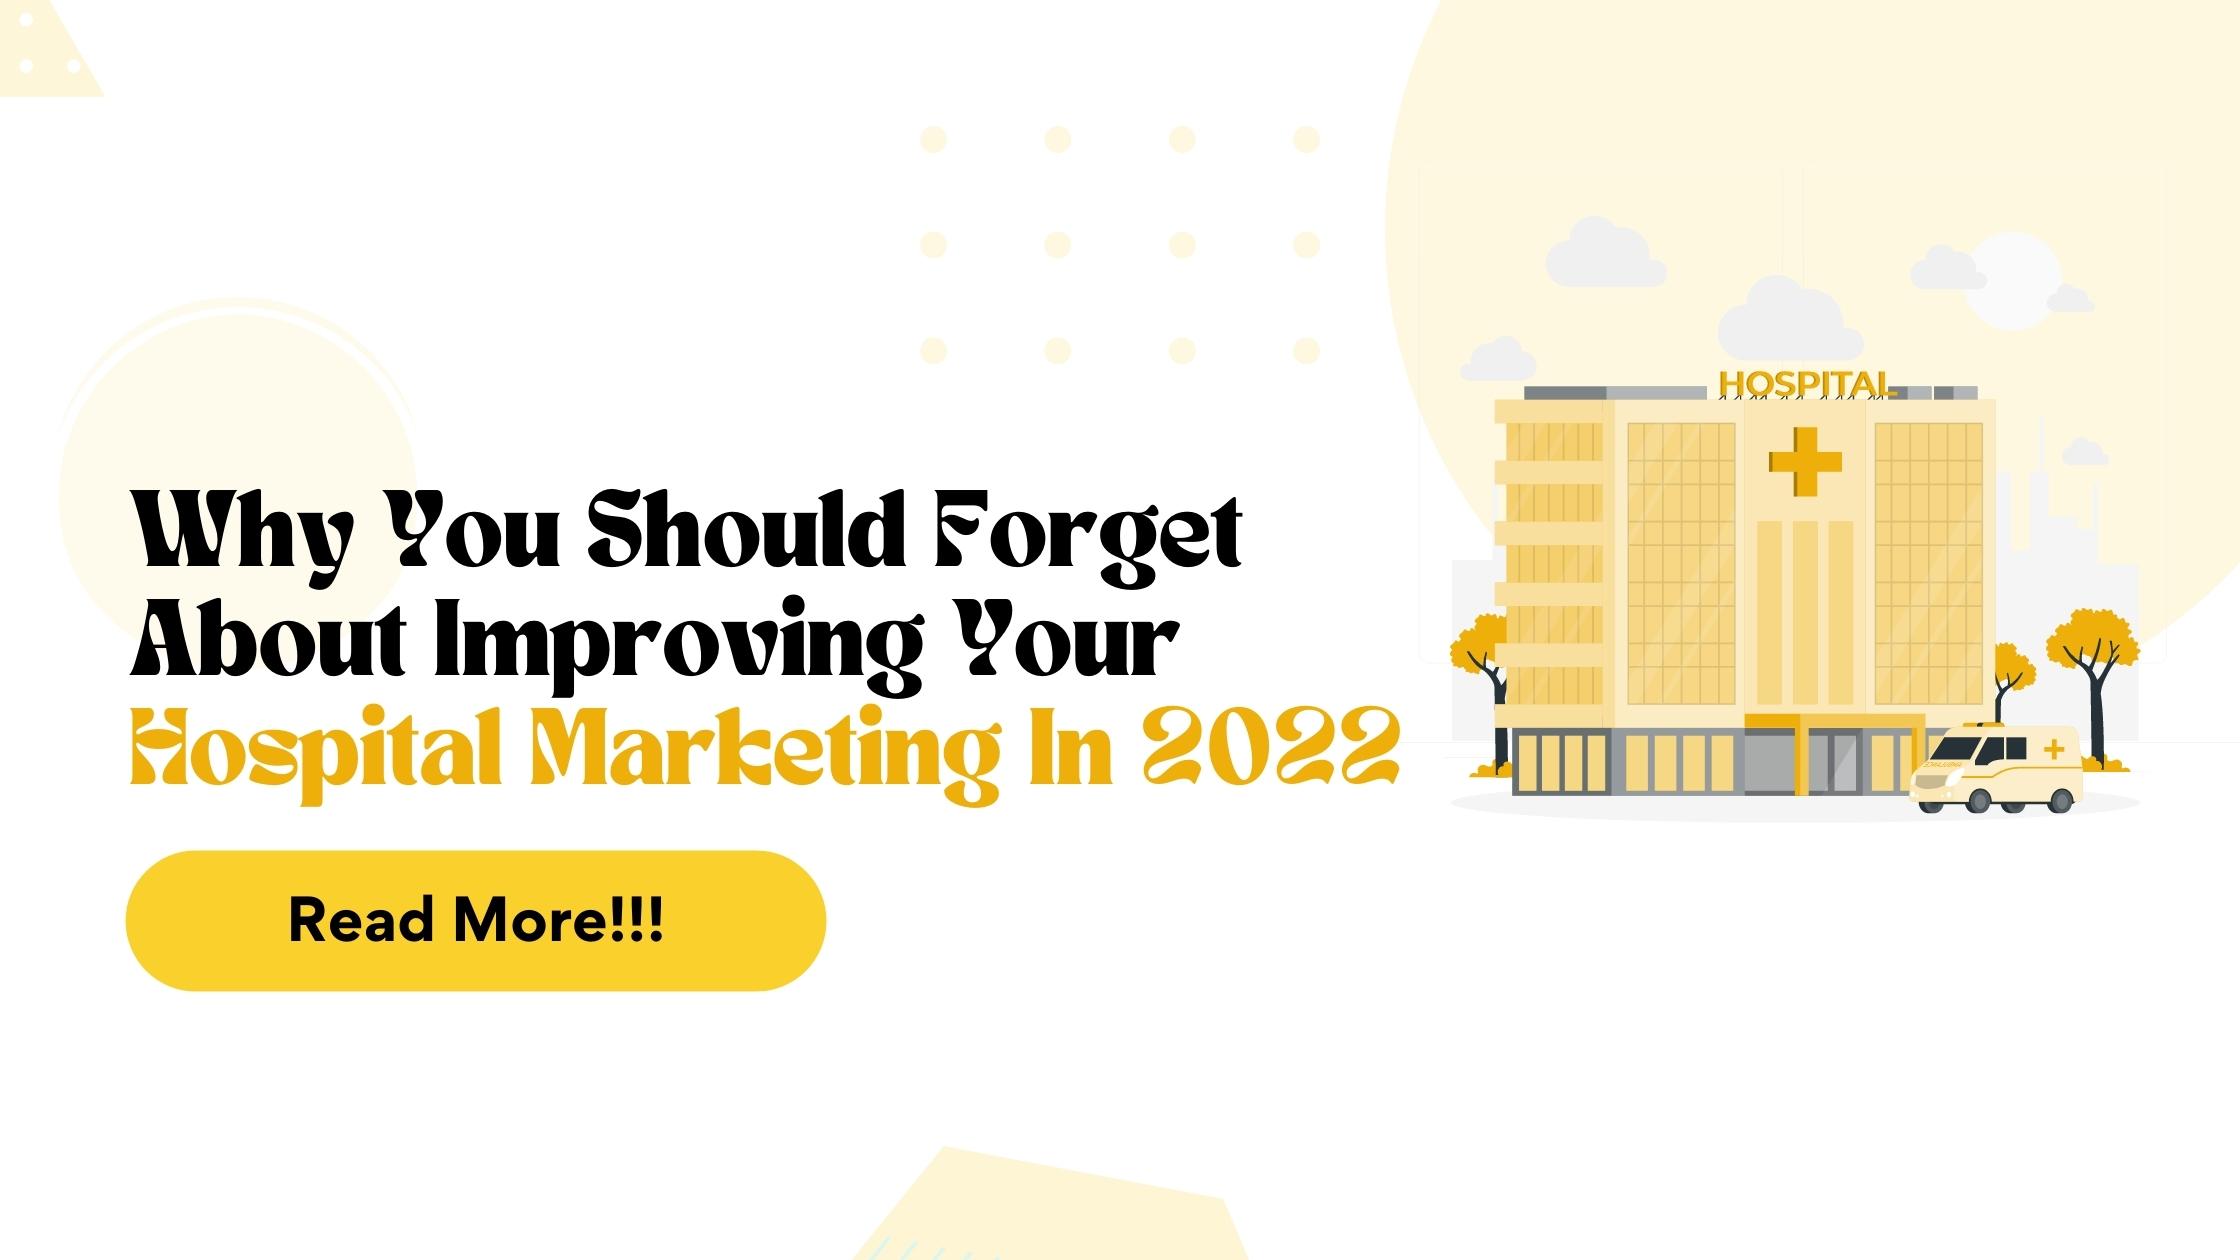 WHY YOU SHOULD FORGET ABOUT IMPROVING YOUR HOSPITAL MARKETING IN 2022